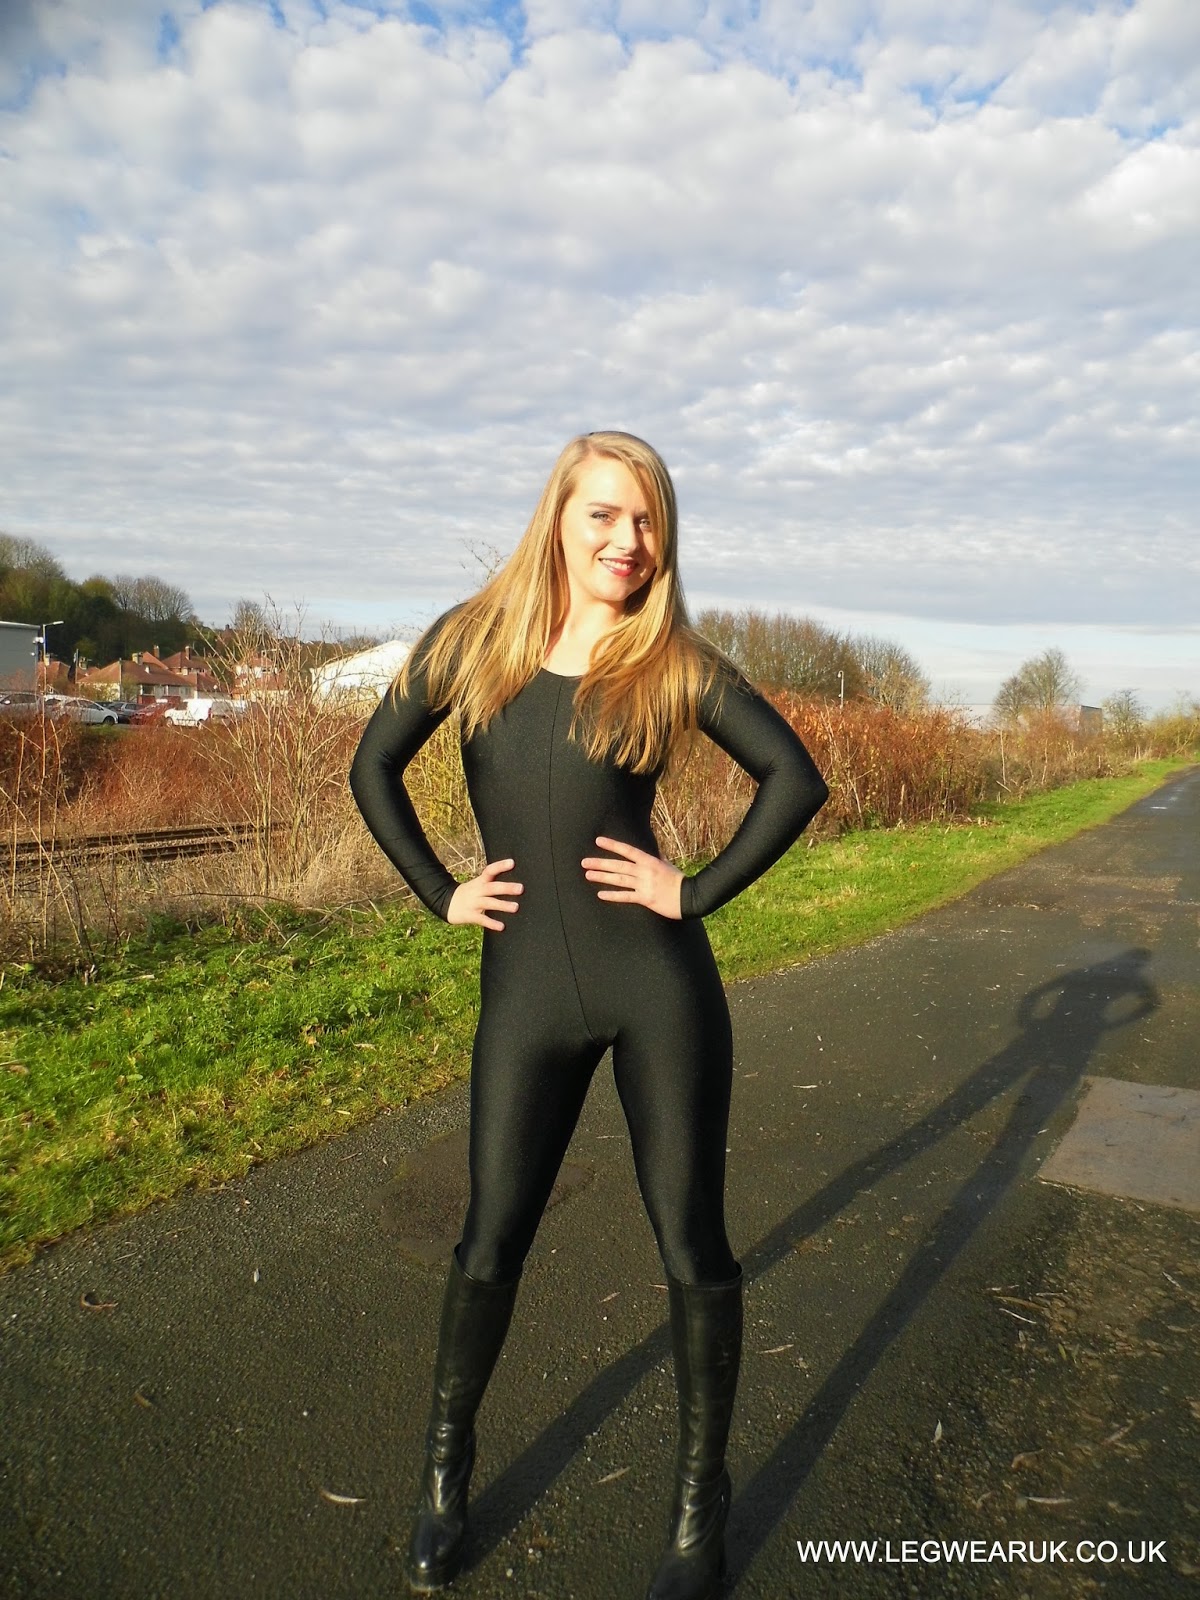 The Spandex Statement: Black Spandex Footed Catsuit from Legwearuk